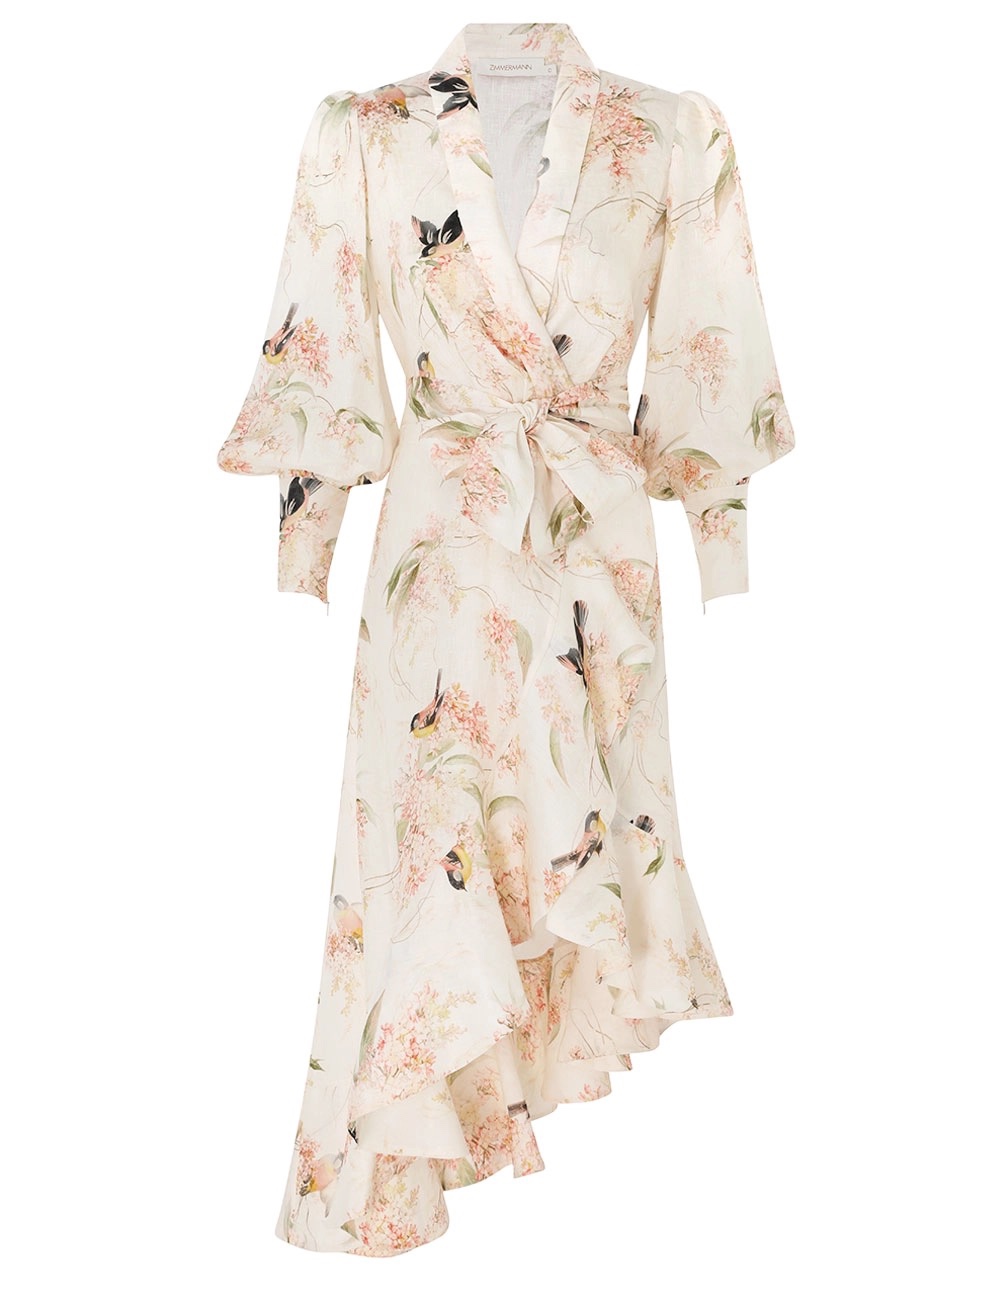 Zimmermann's white bird-print linen dress features a wrapped bodice that ties with a wide belt and falls to a midi skirt with cascading ruffles.